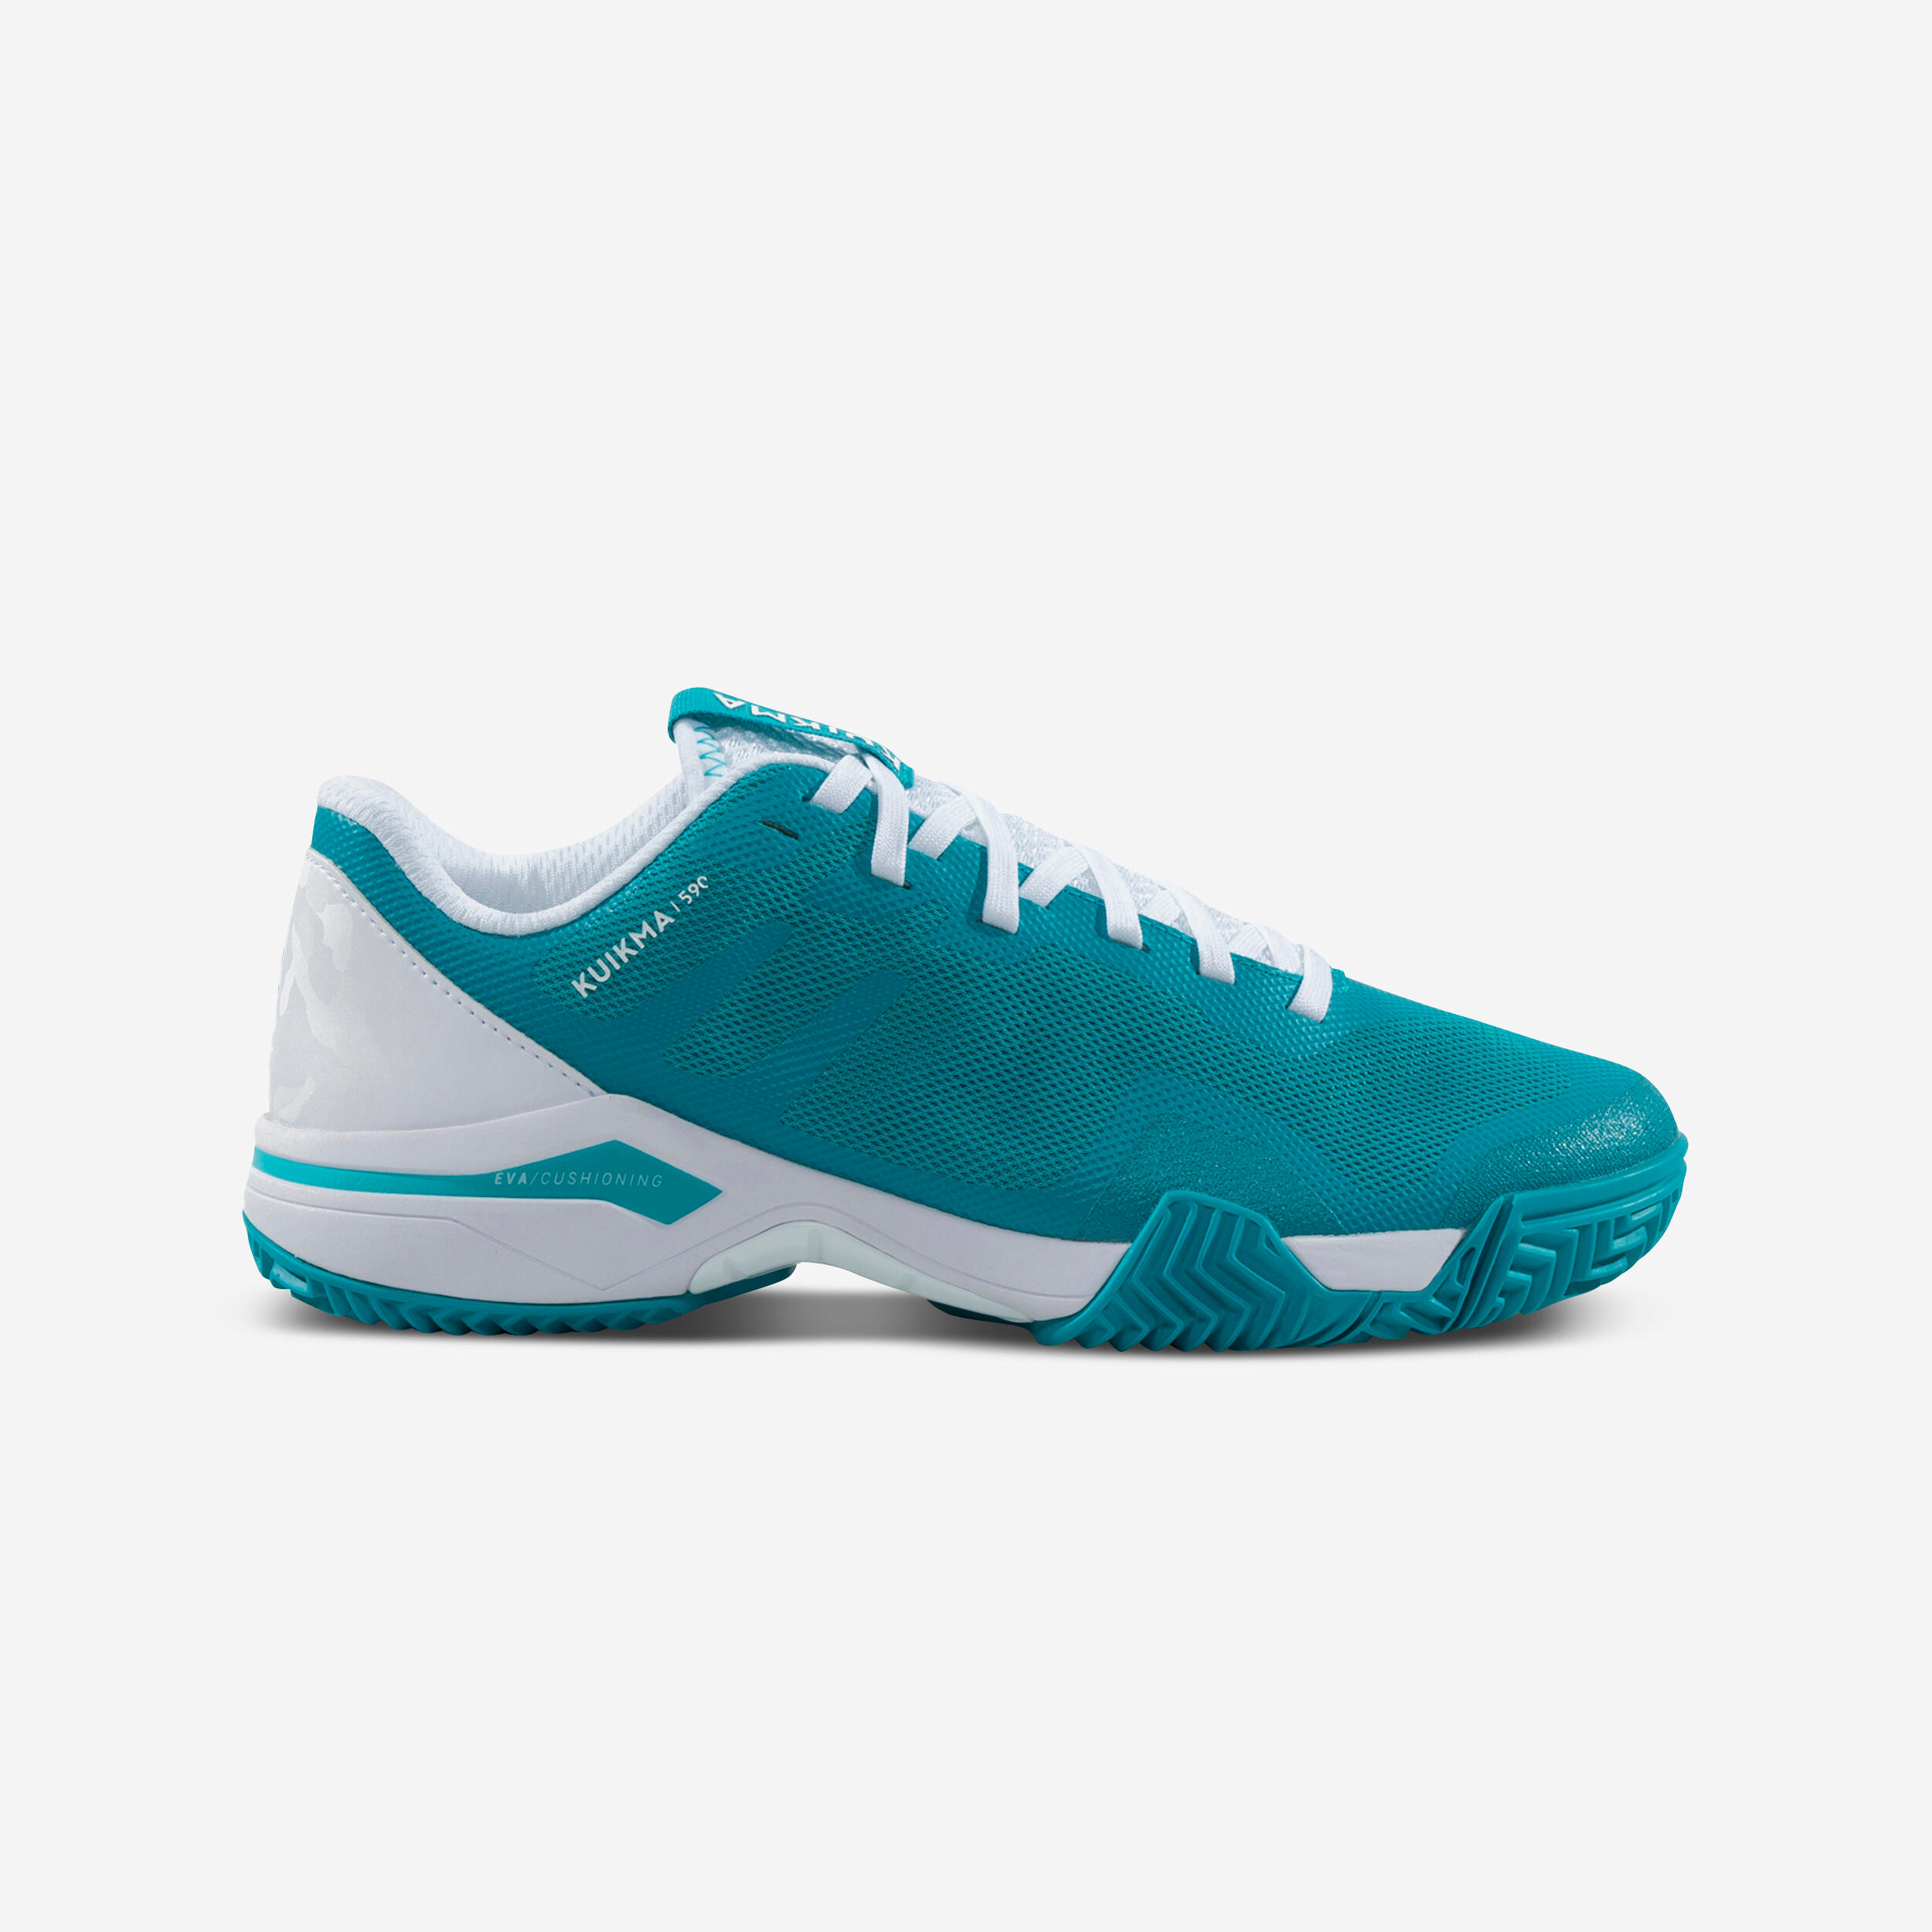 Women's Padel Shoes PS 590 - Turquoise 1/5